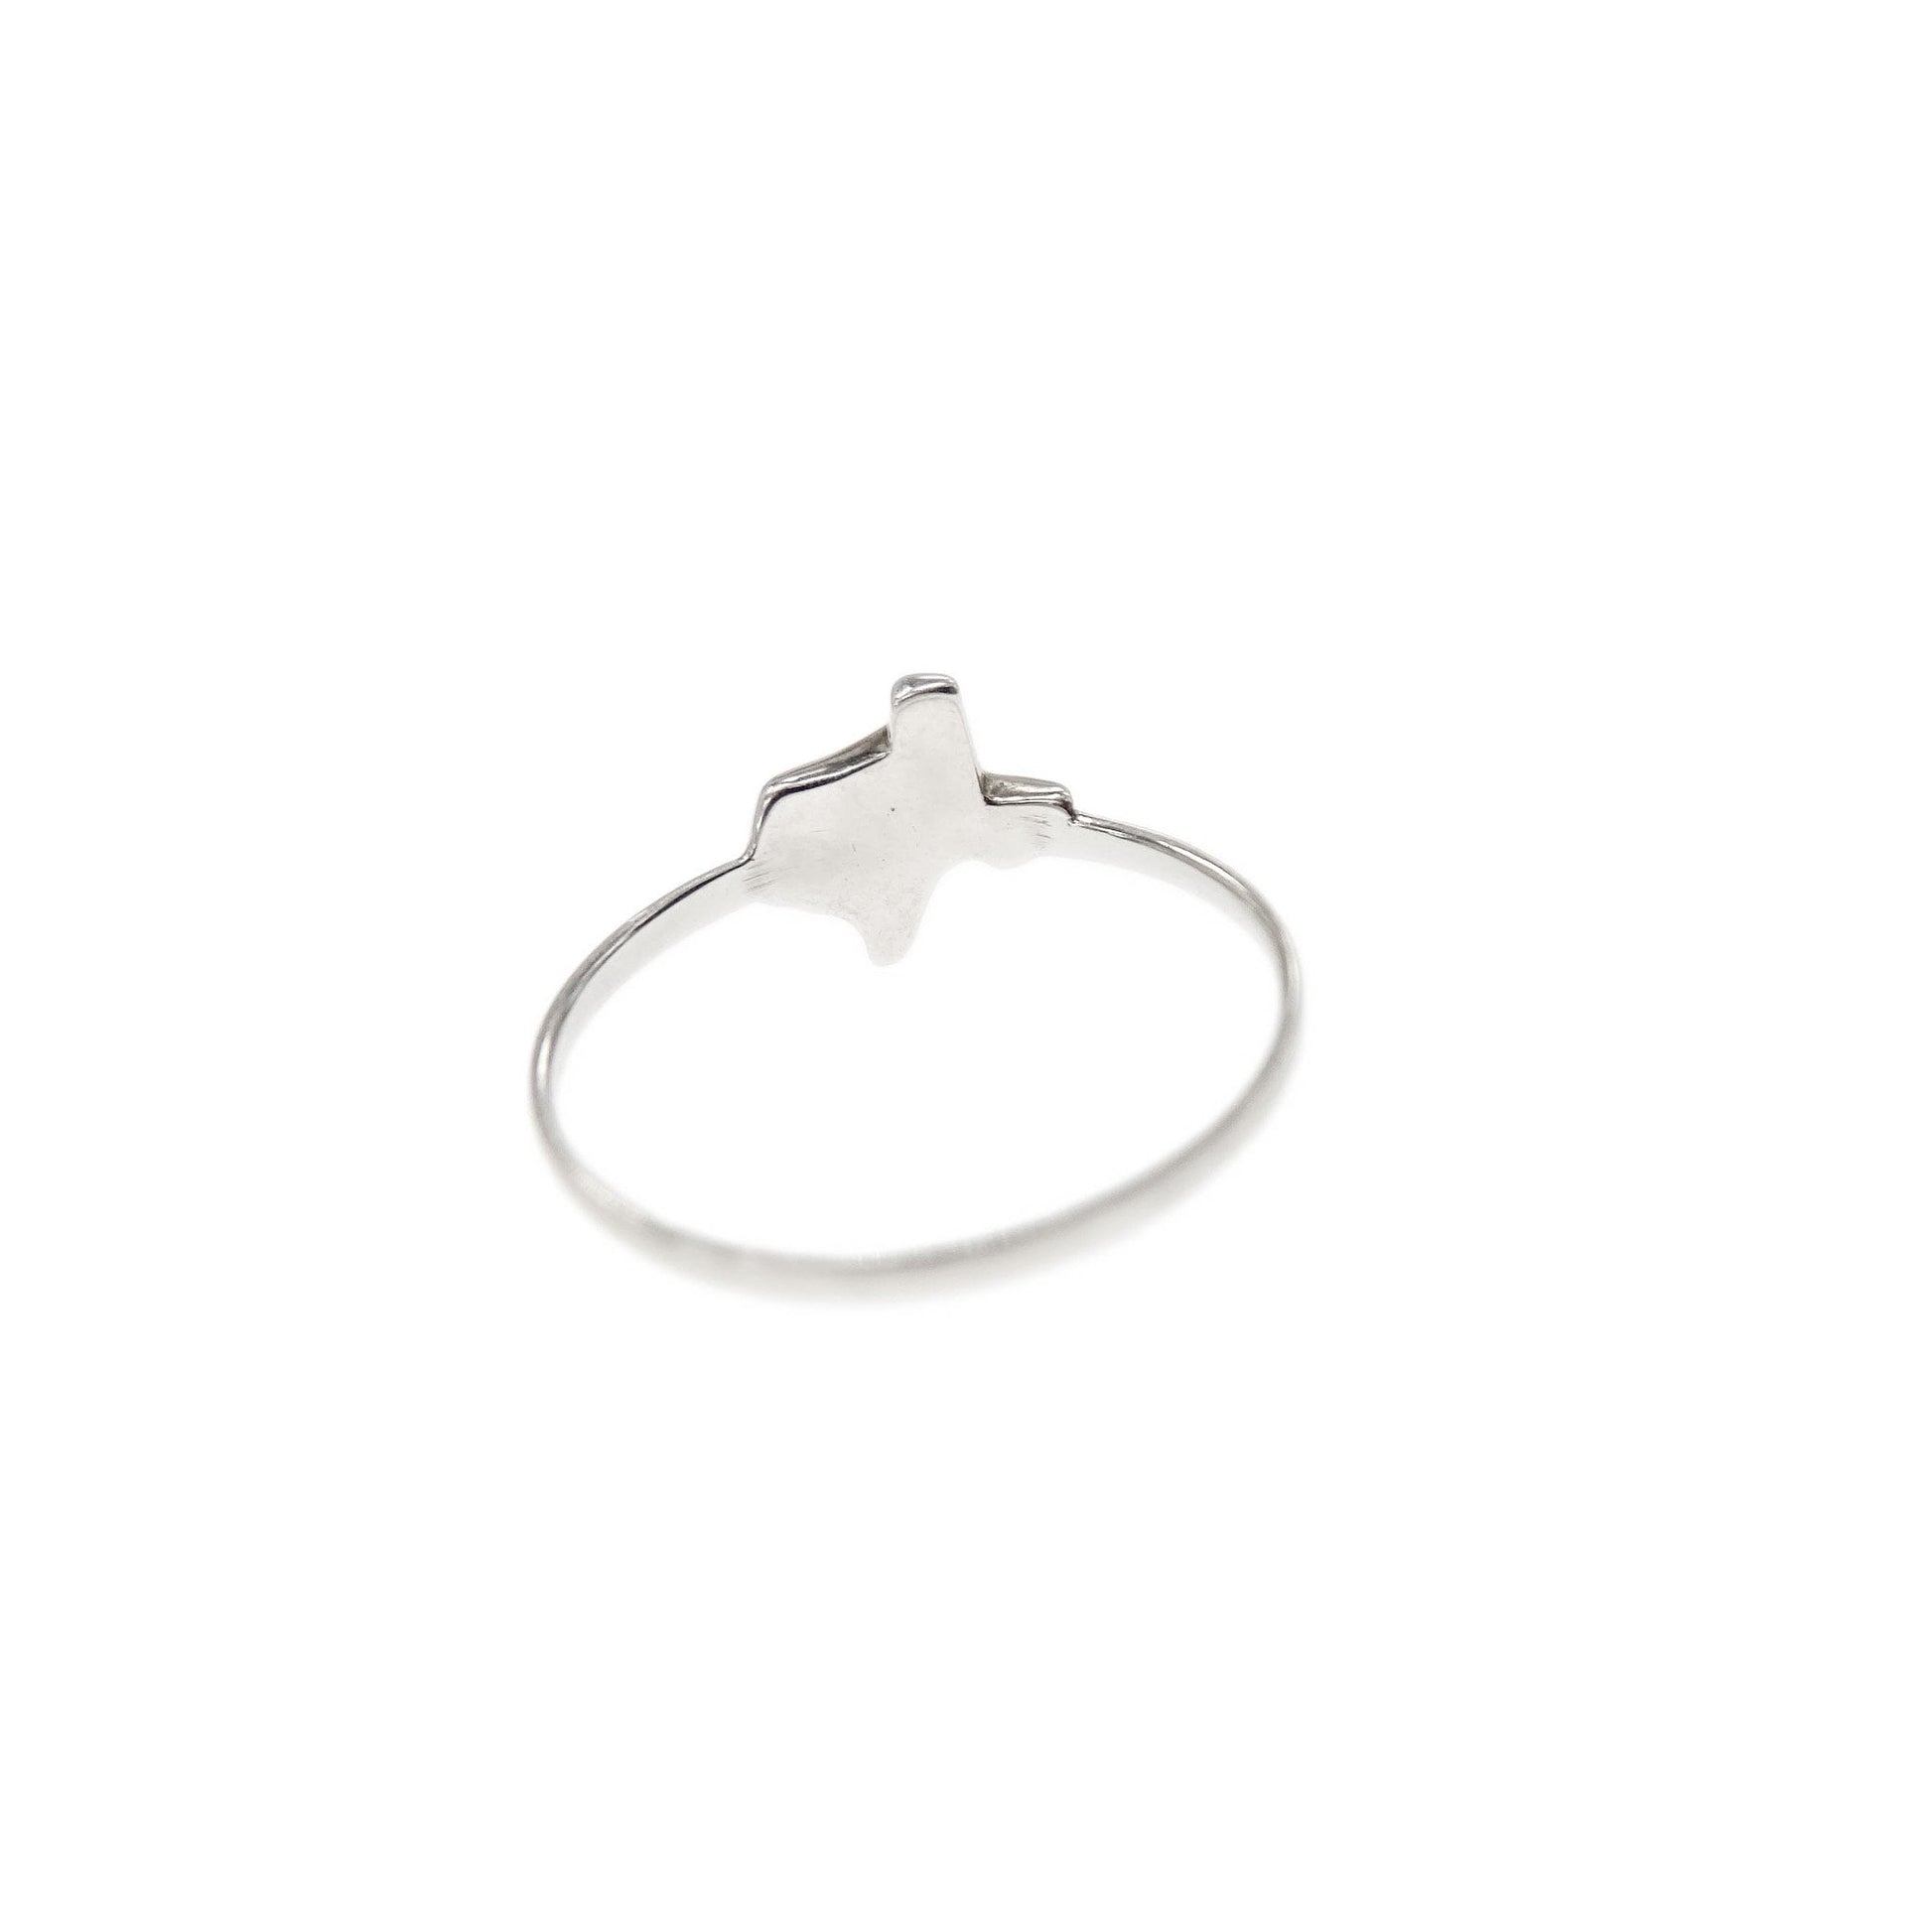 Texas Gal's Delight: Dainty Minimalist Texas Ring - Perfect Gift for Her or University of Texas (UT) Fan